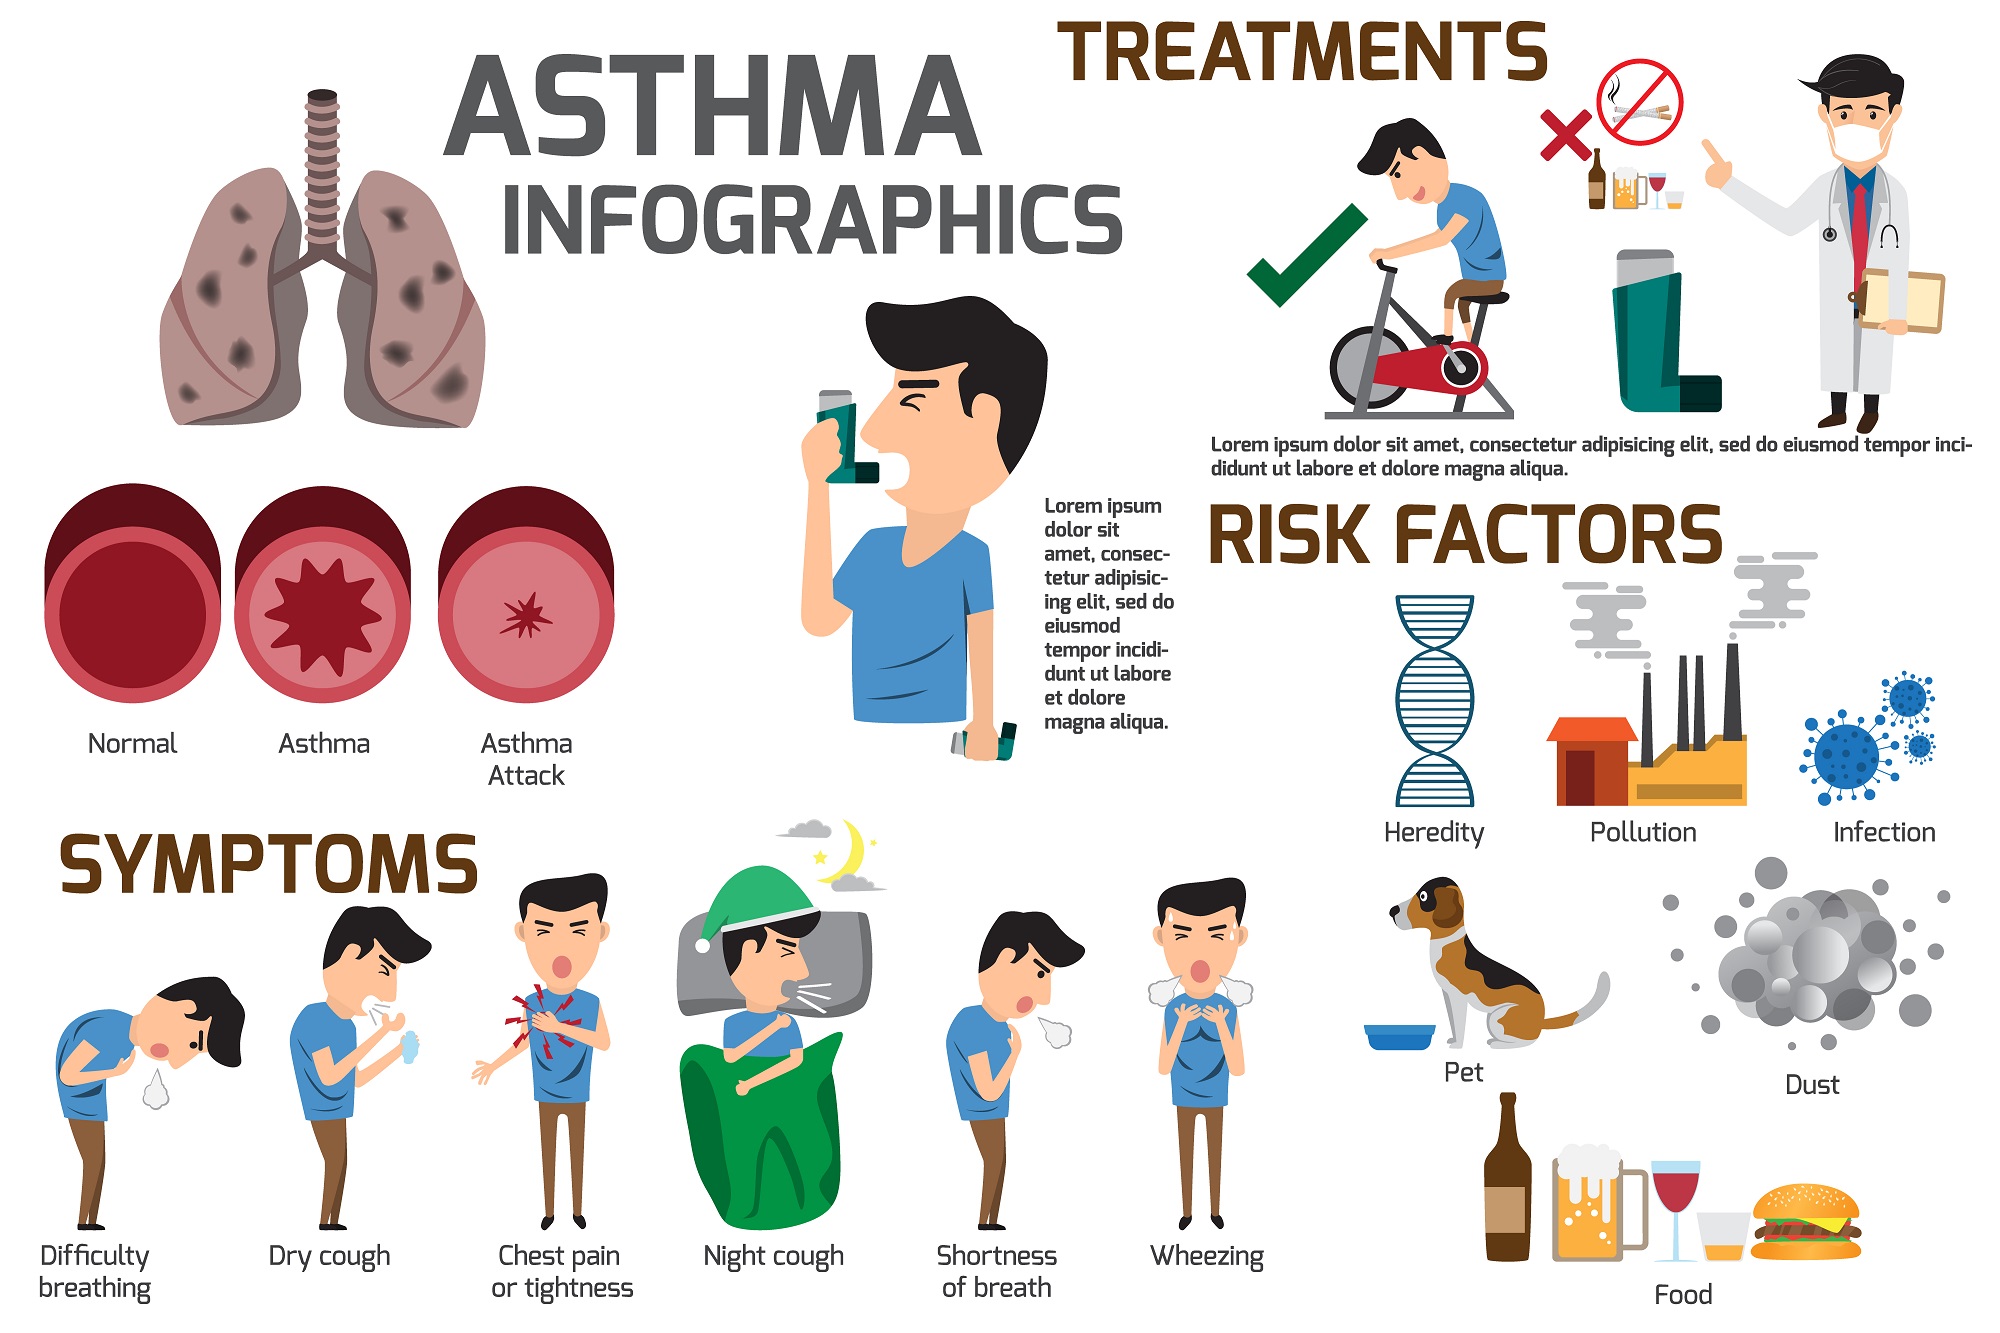 Asthma Treatment in Annapolis, MD | Asthma & Pulmonary Specialists